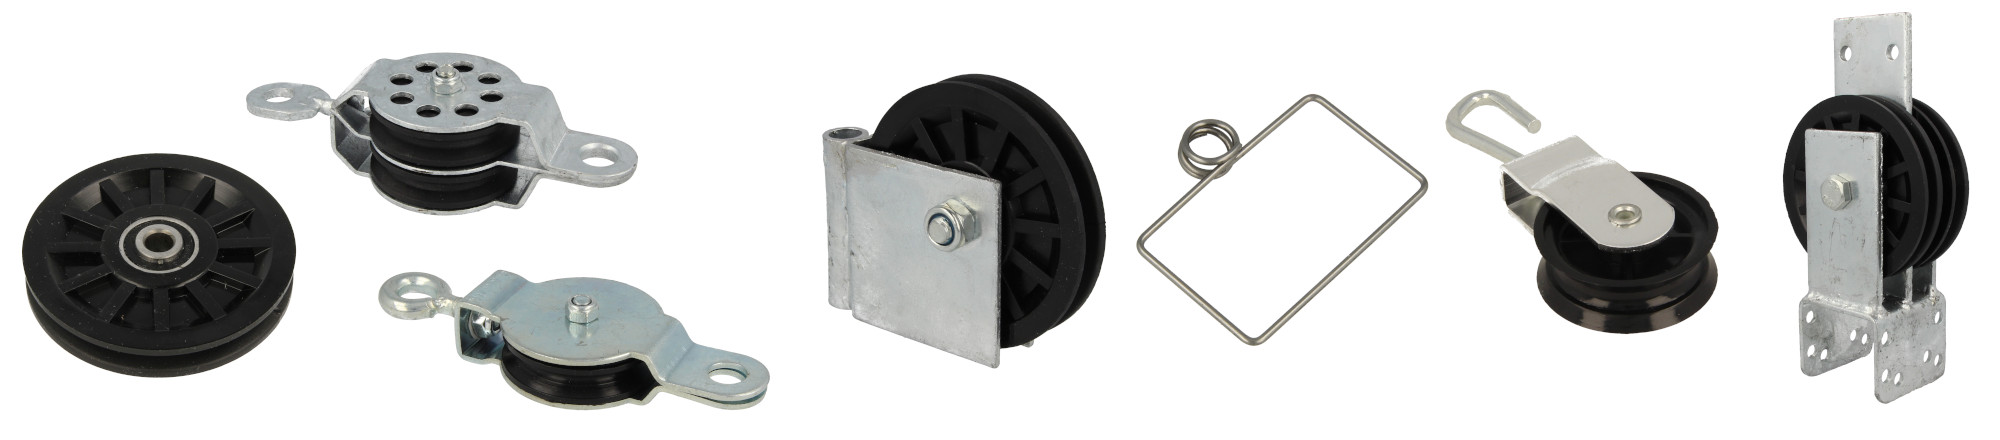 Wheel brackets, pulleys and accessories